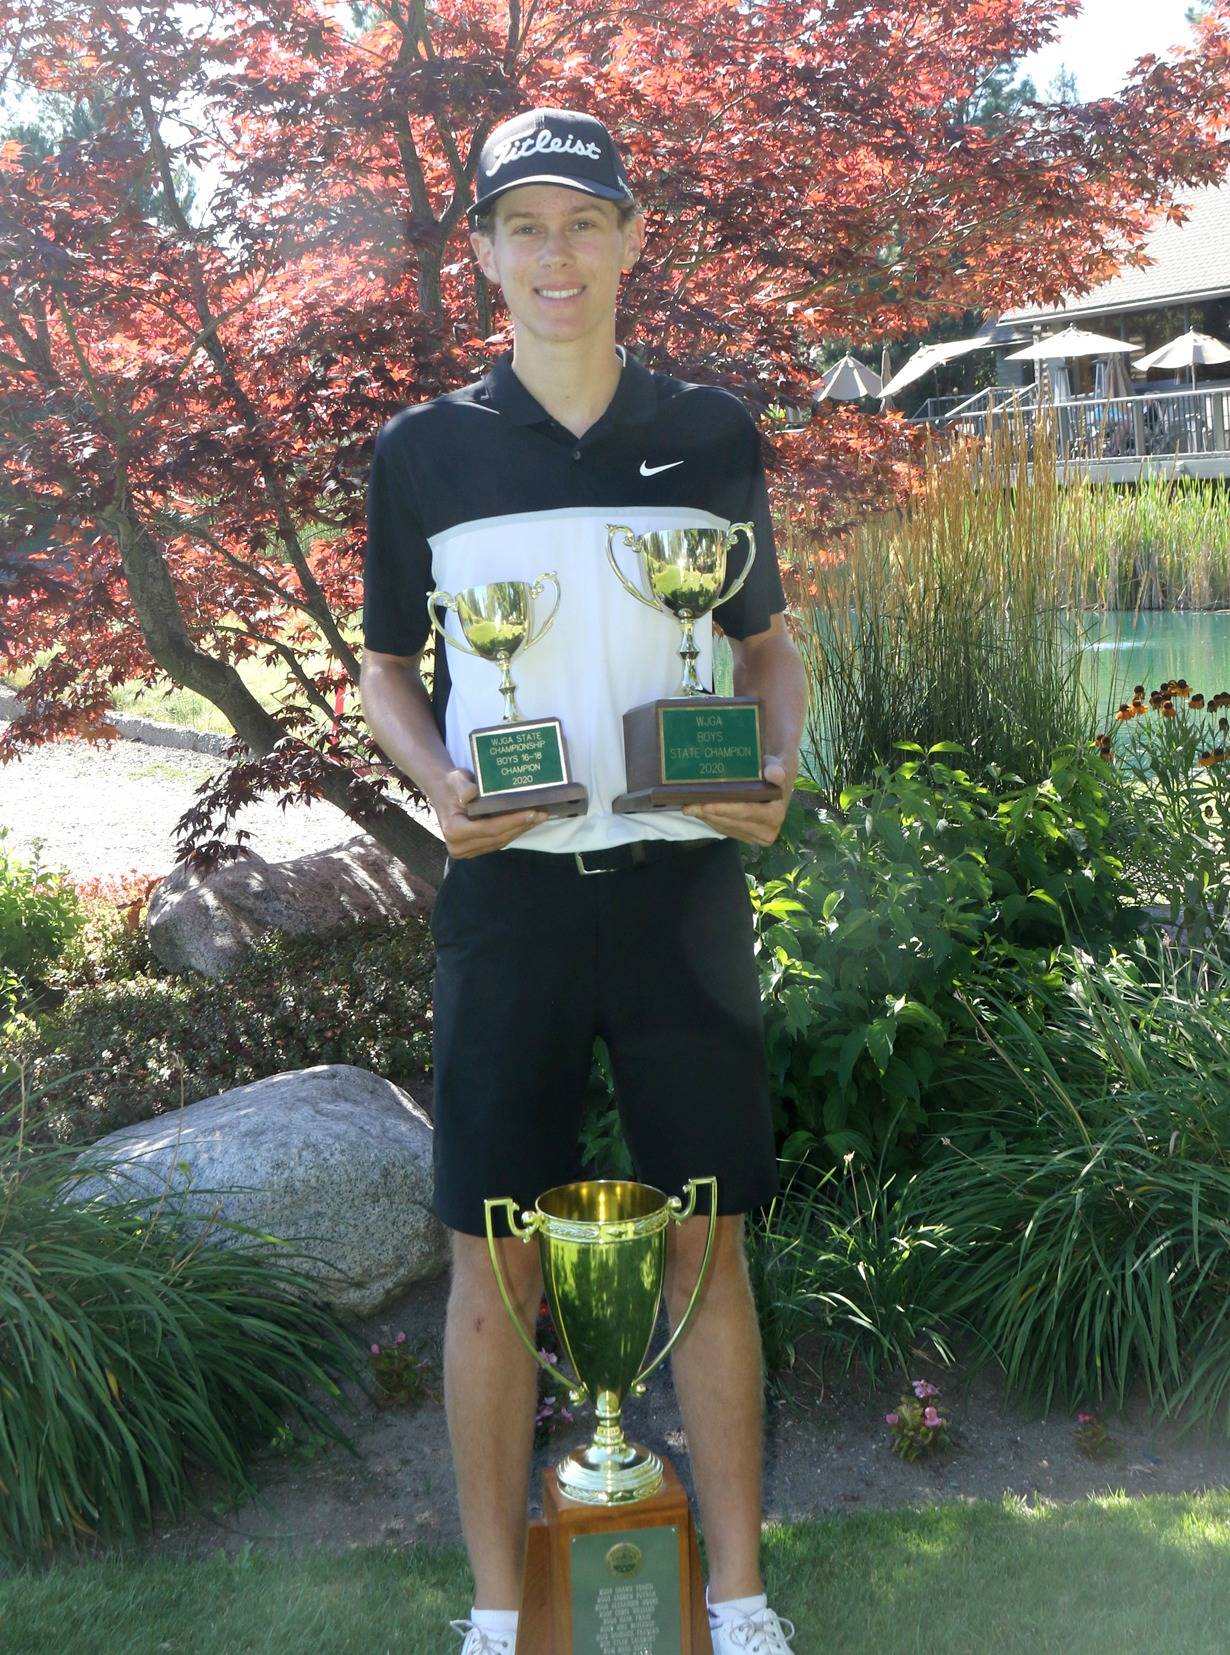 Ethan Evans notched the Washington Junior Golf Association state tournament crown this month. Courtesy of the WJGA